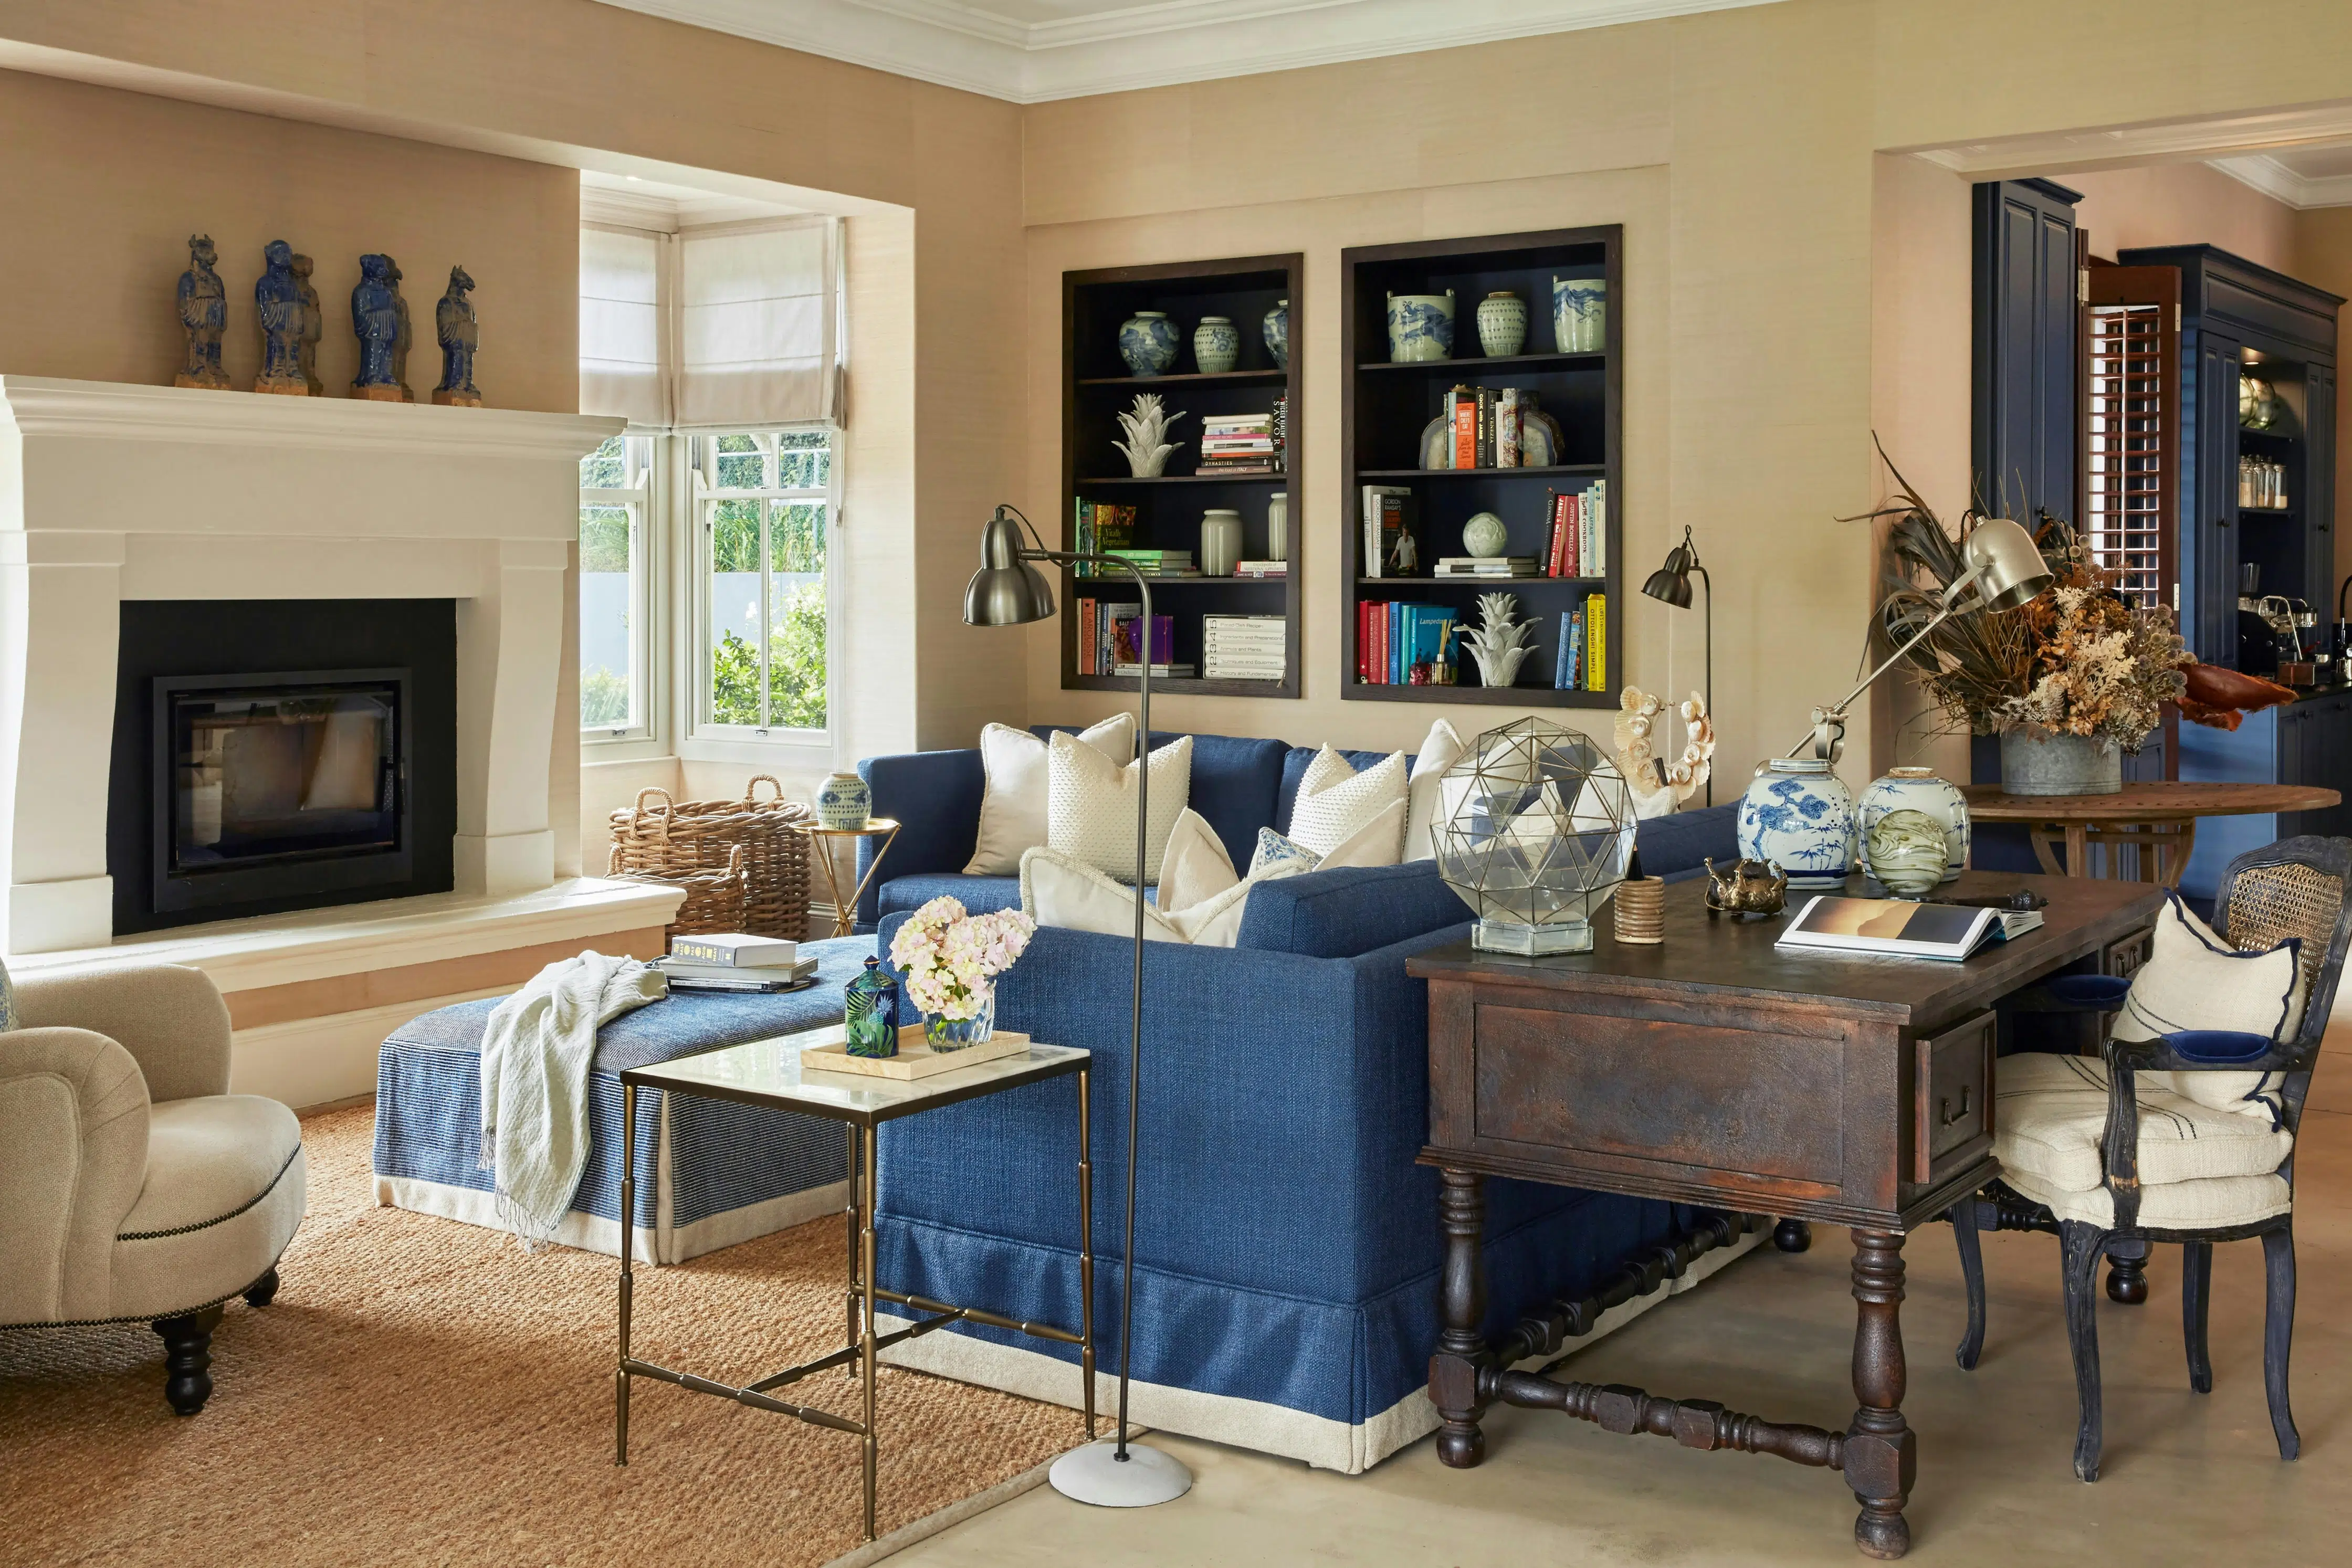 A comfortably furnished living room features couches upholstered in blue, a heavy wooden writing desk, bookshelves and a large, simple fireplace.